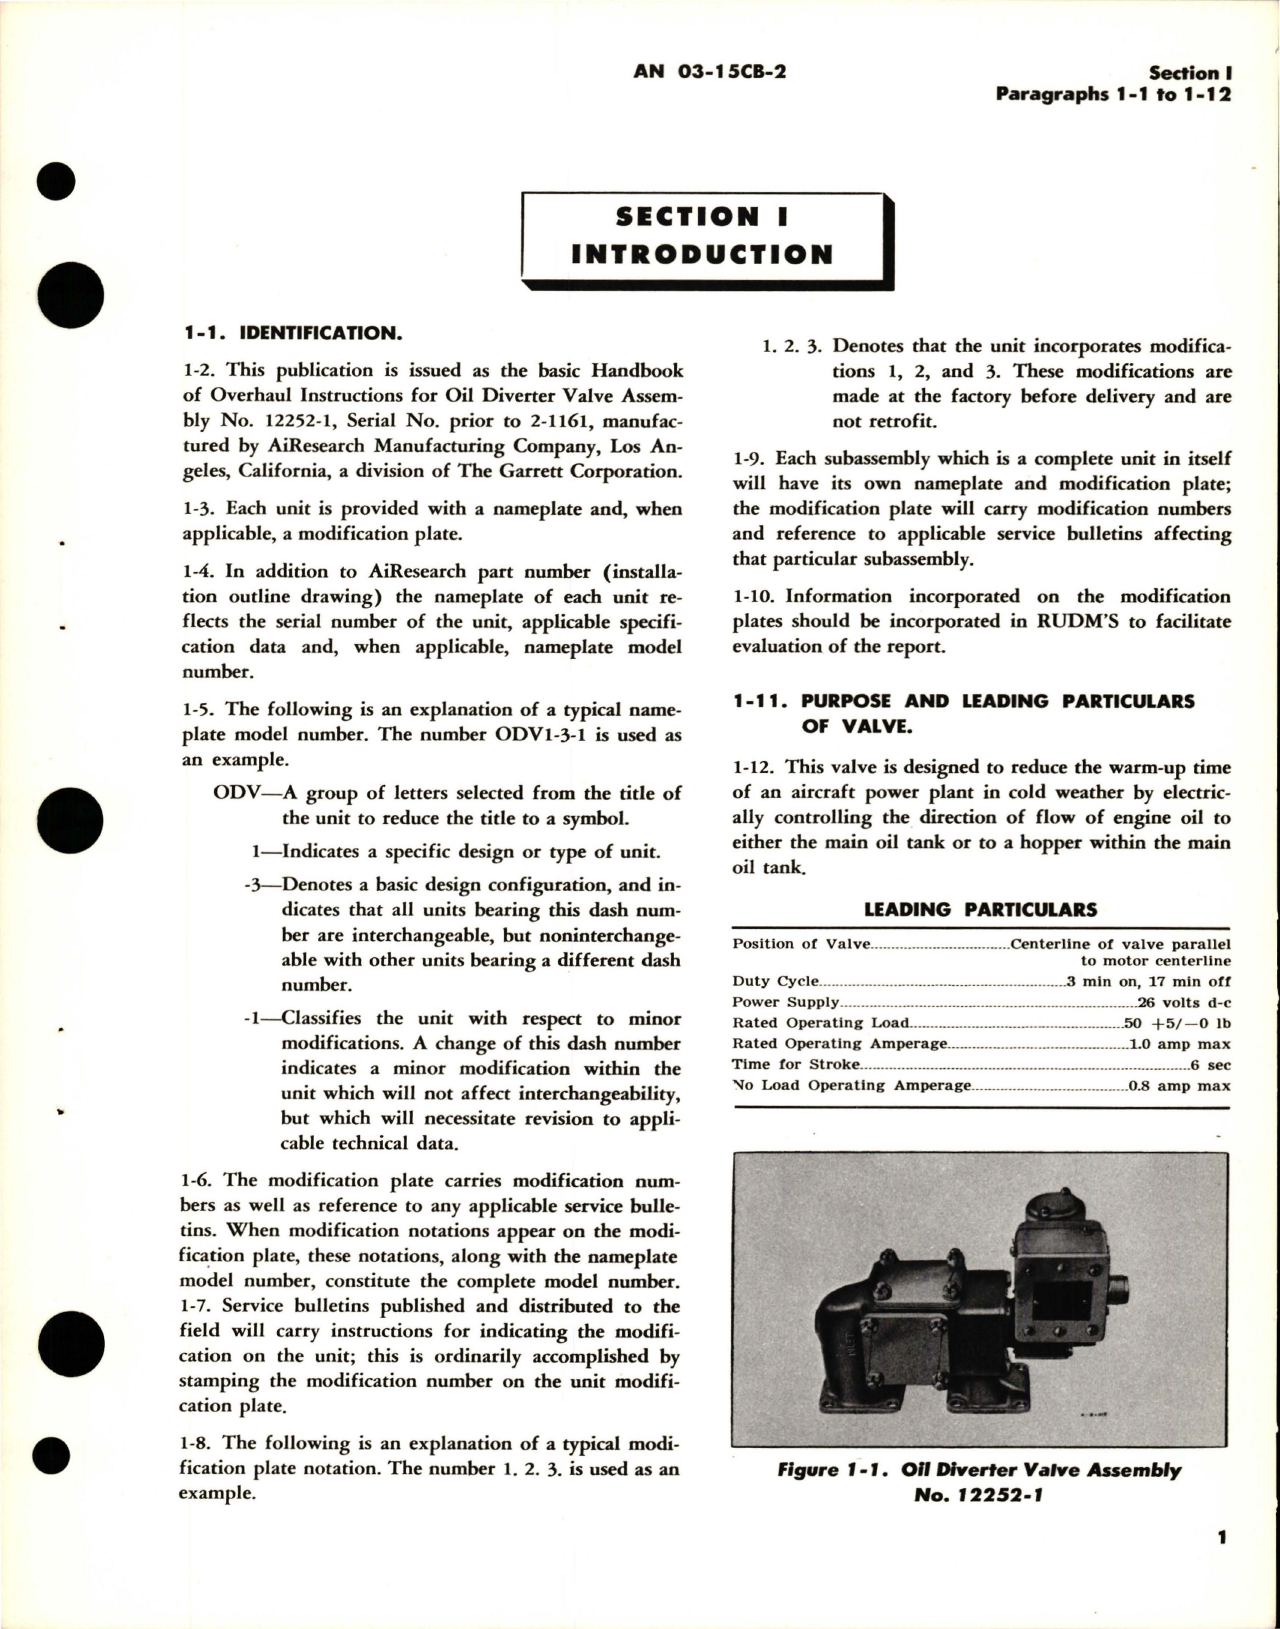 Sample page 5 from AirCorps Library document: Overhaul Instructions for Oil Diverter Valves